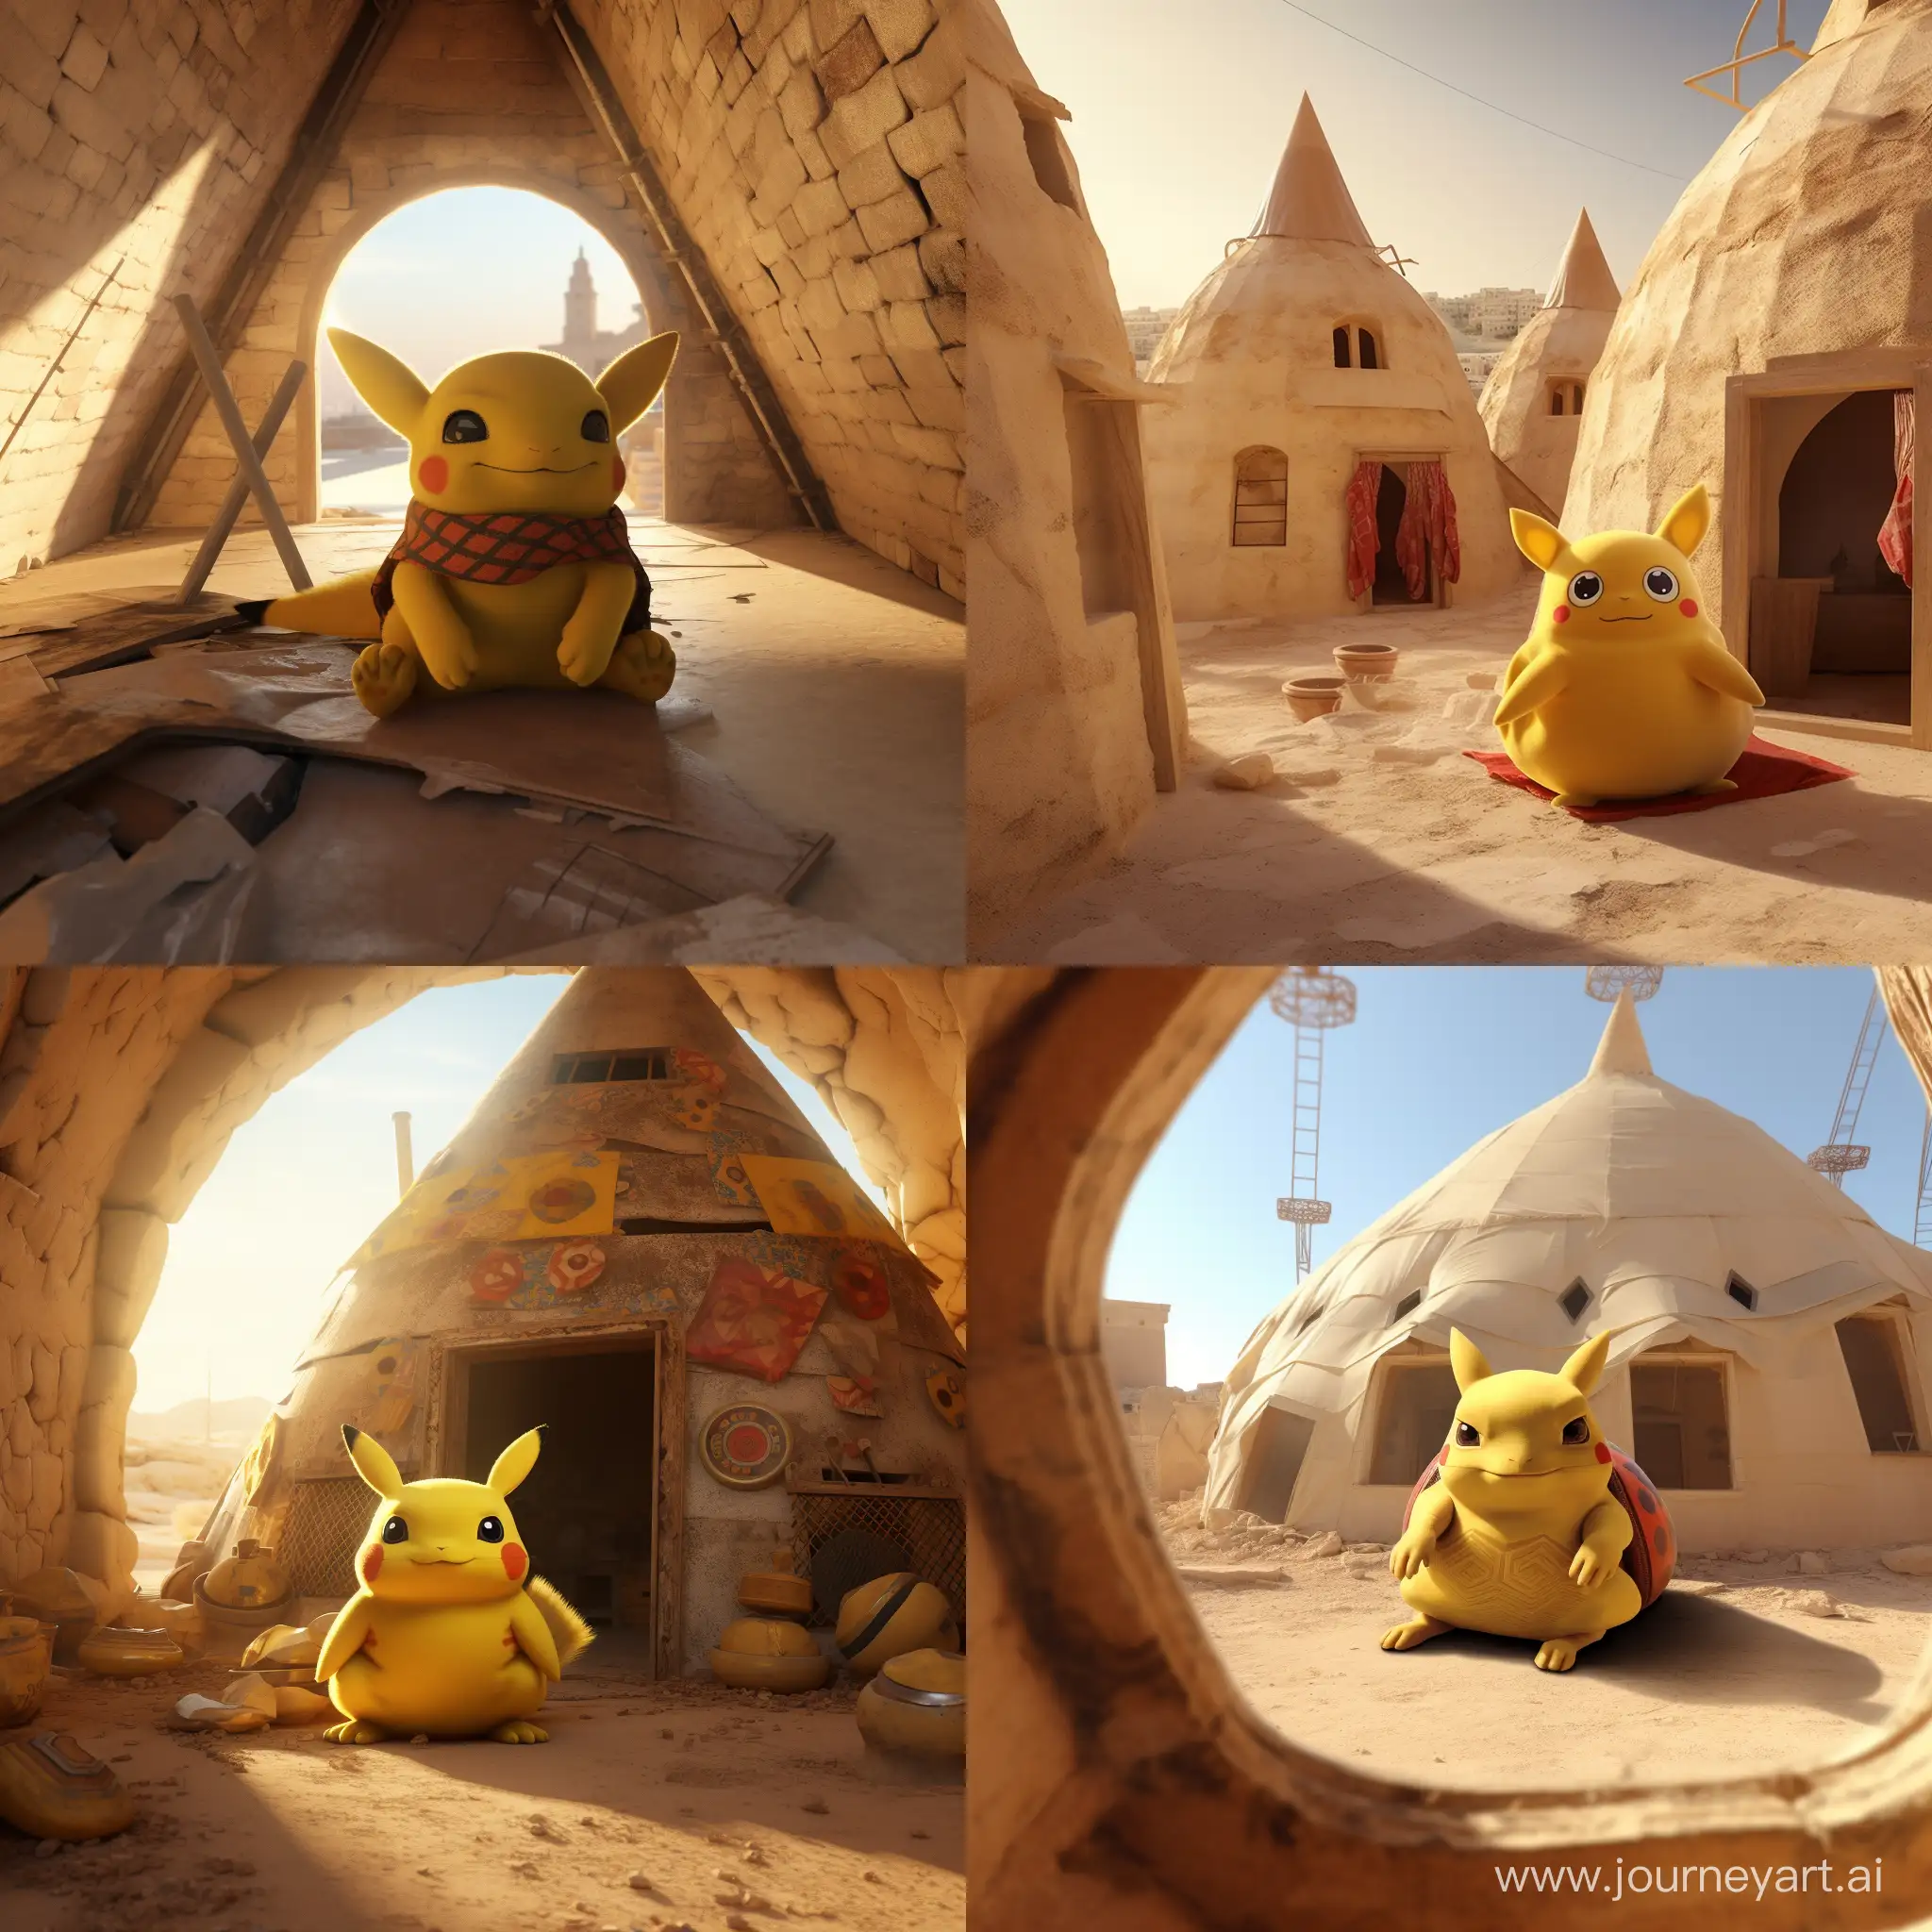 Pikachu-Roaming-Amidst-Historical-Conical-Dome-Houses-in-Harran